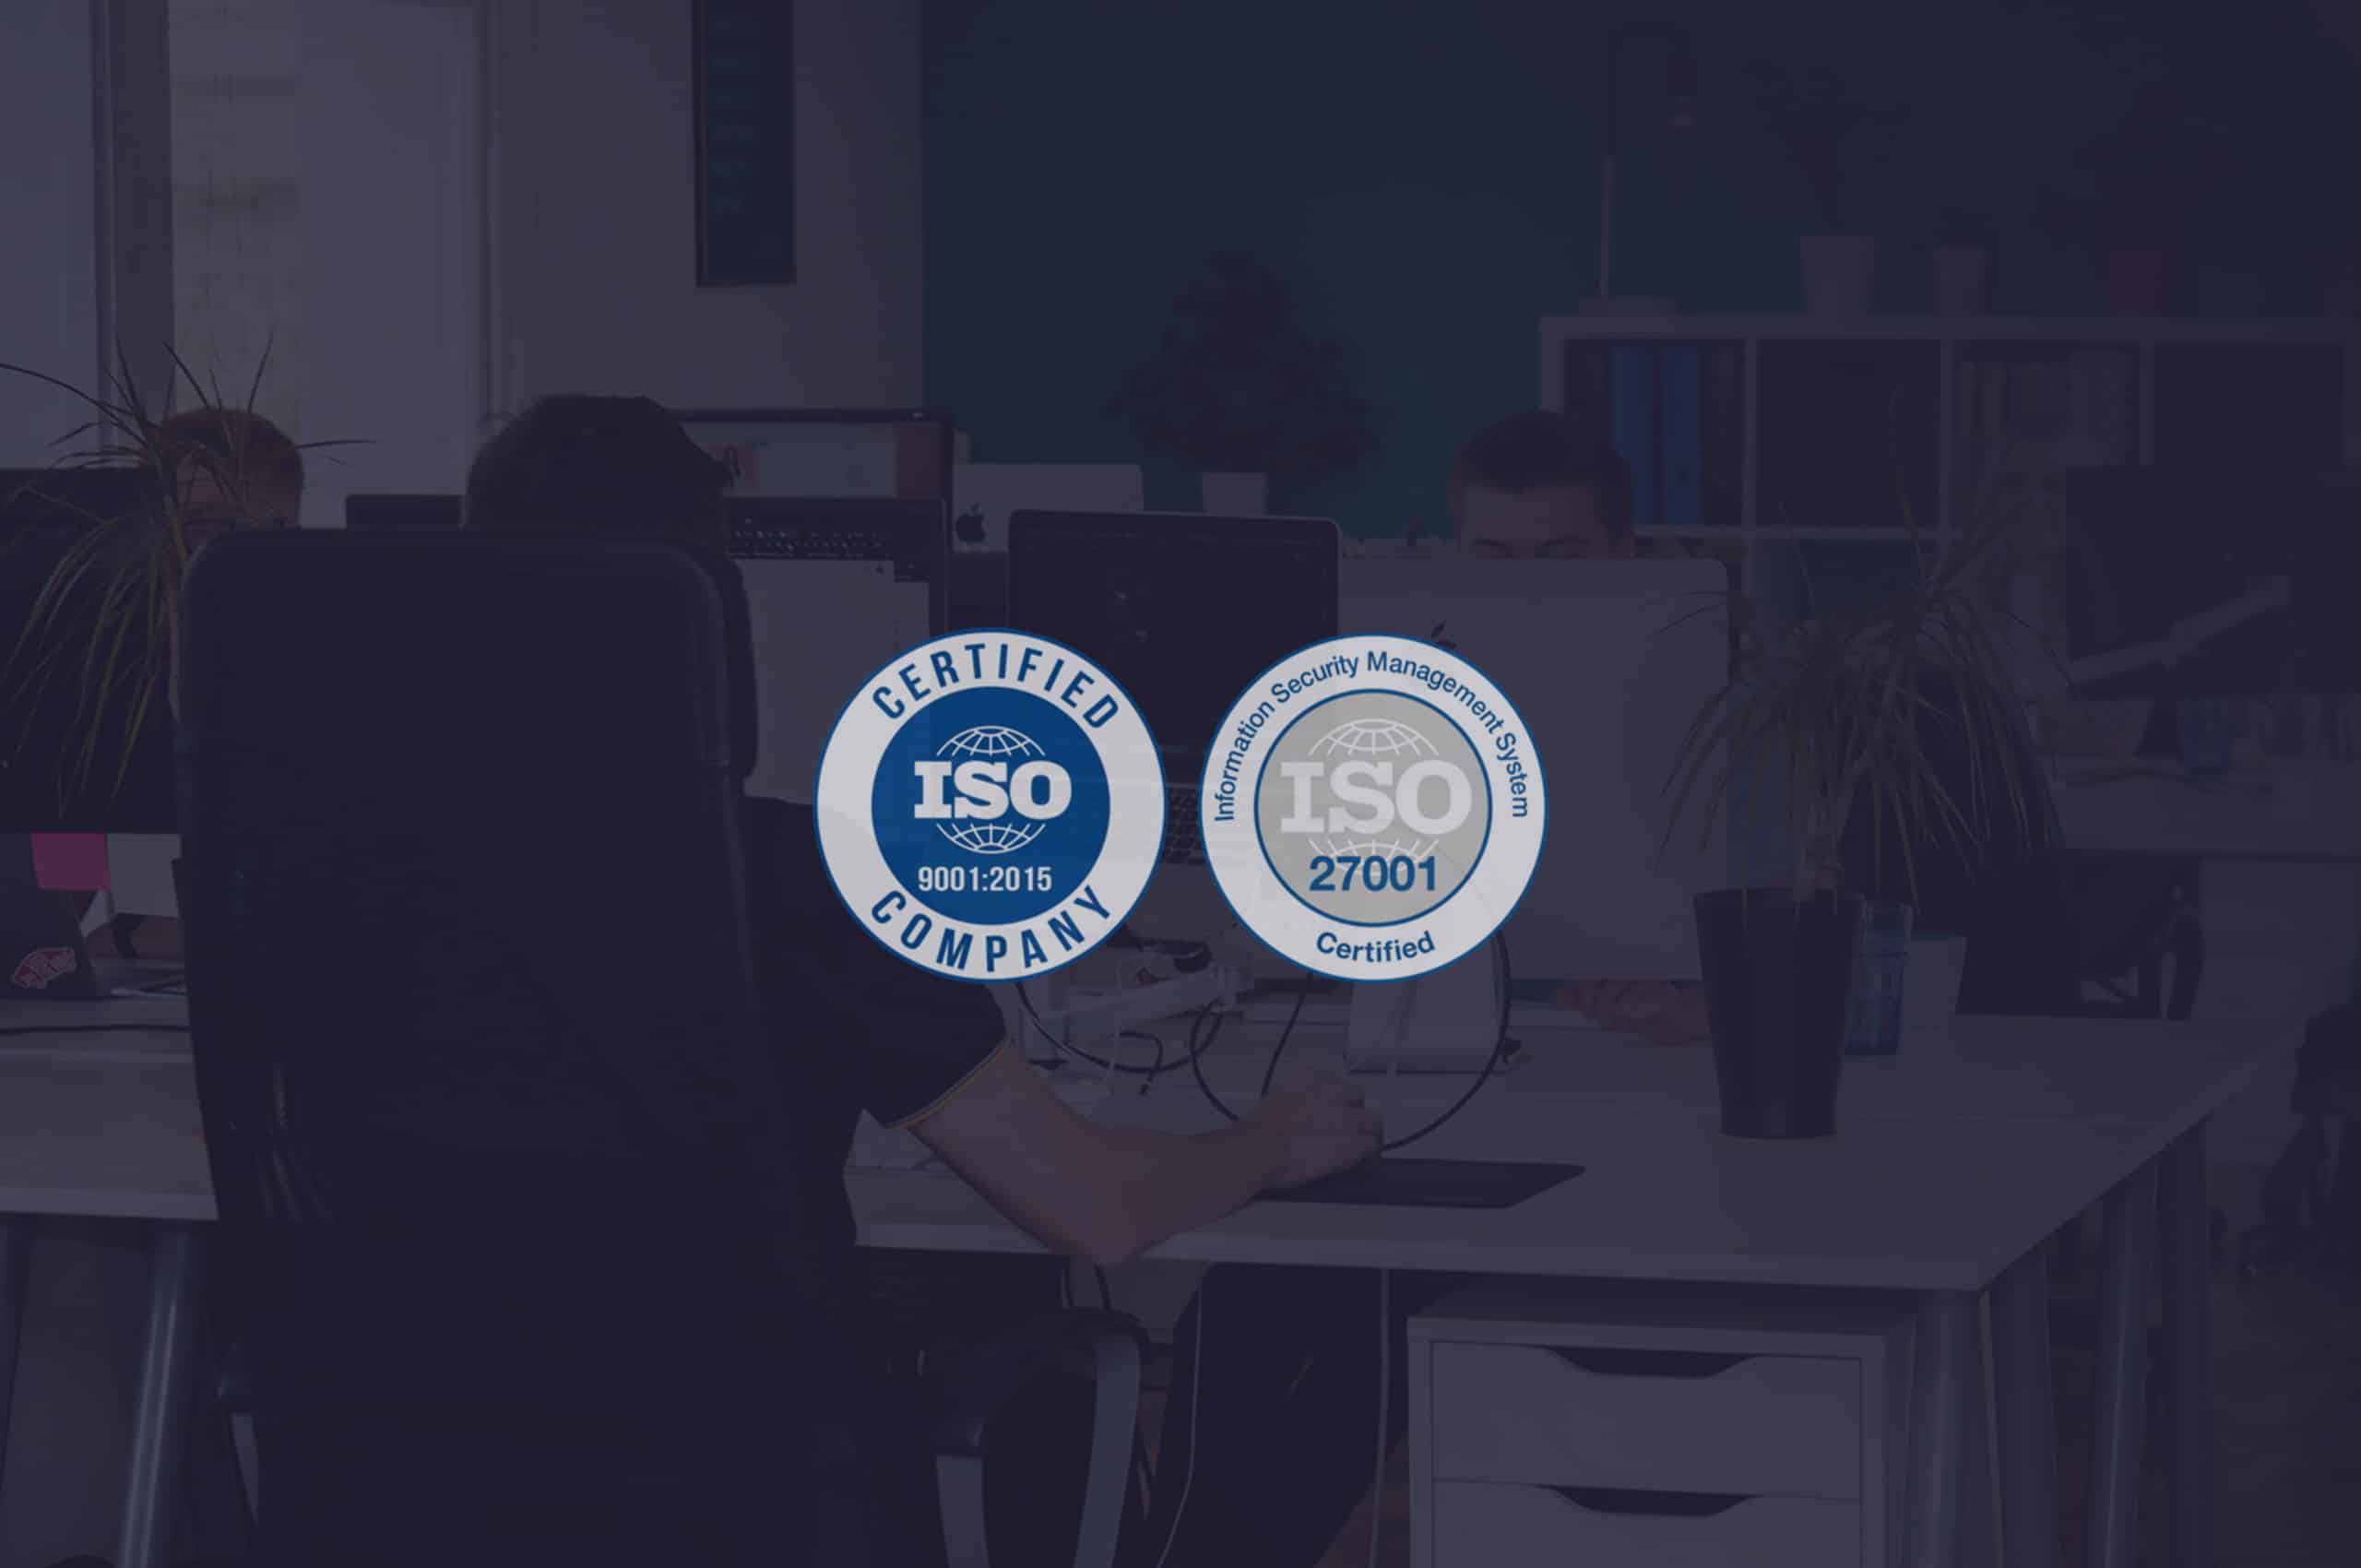 Earning global respect for quality and security – ISO 9001 and ISO 27001